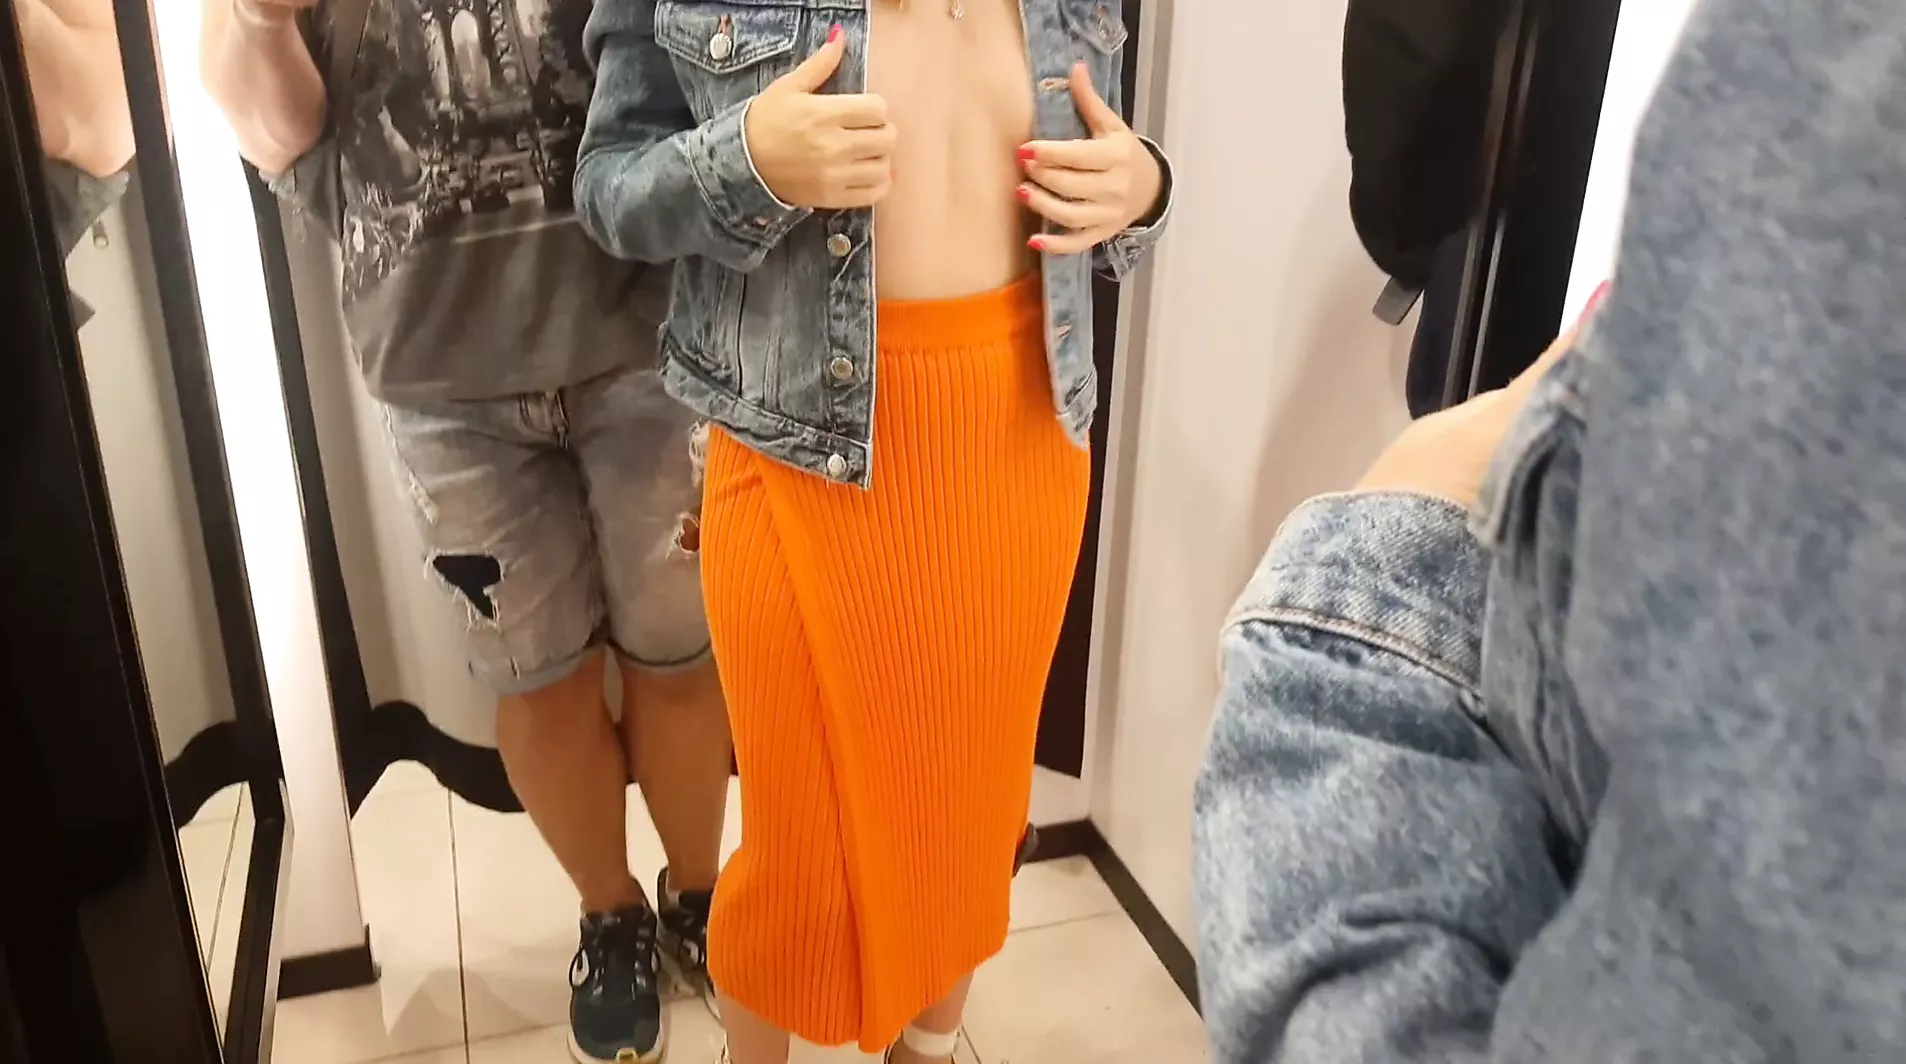 A Sexy Stranger Asked Me to look at her in the fitting Room image